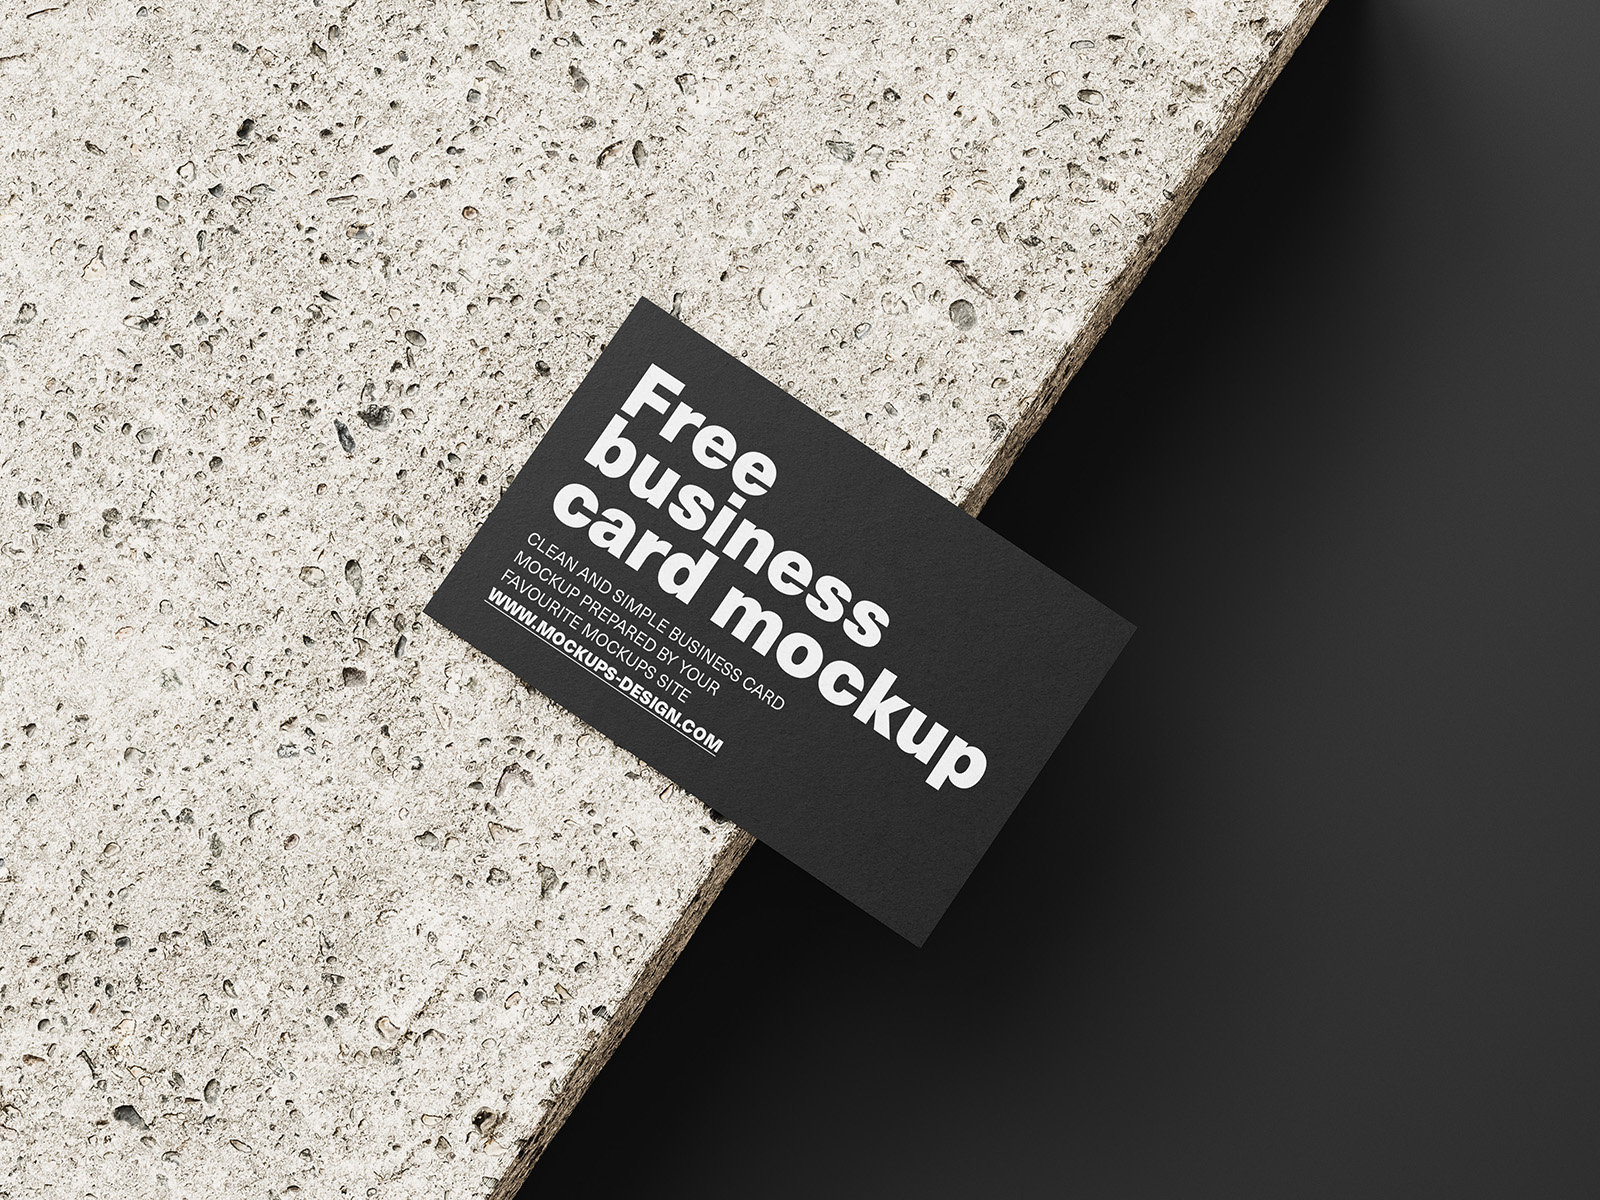 4 Shots of Business Card Mockup on Stone FREE PSD